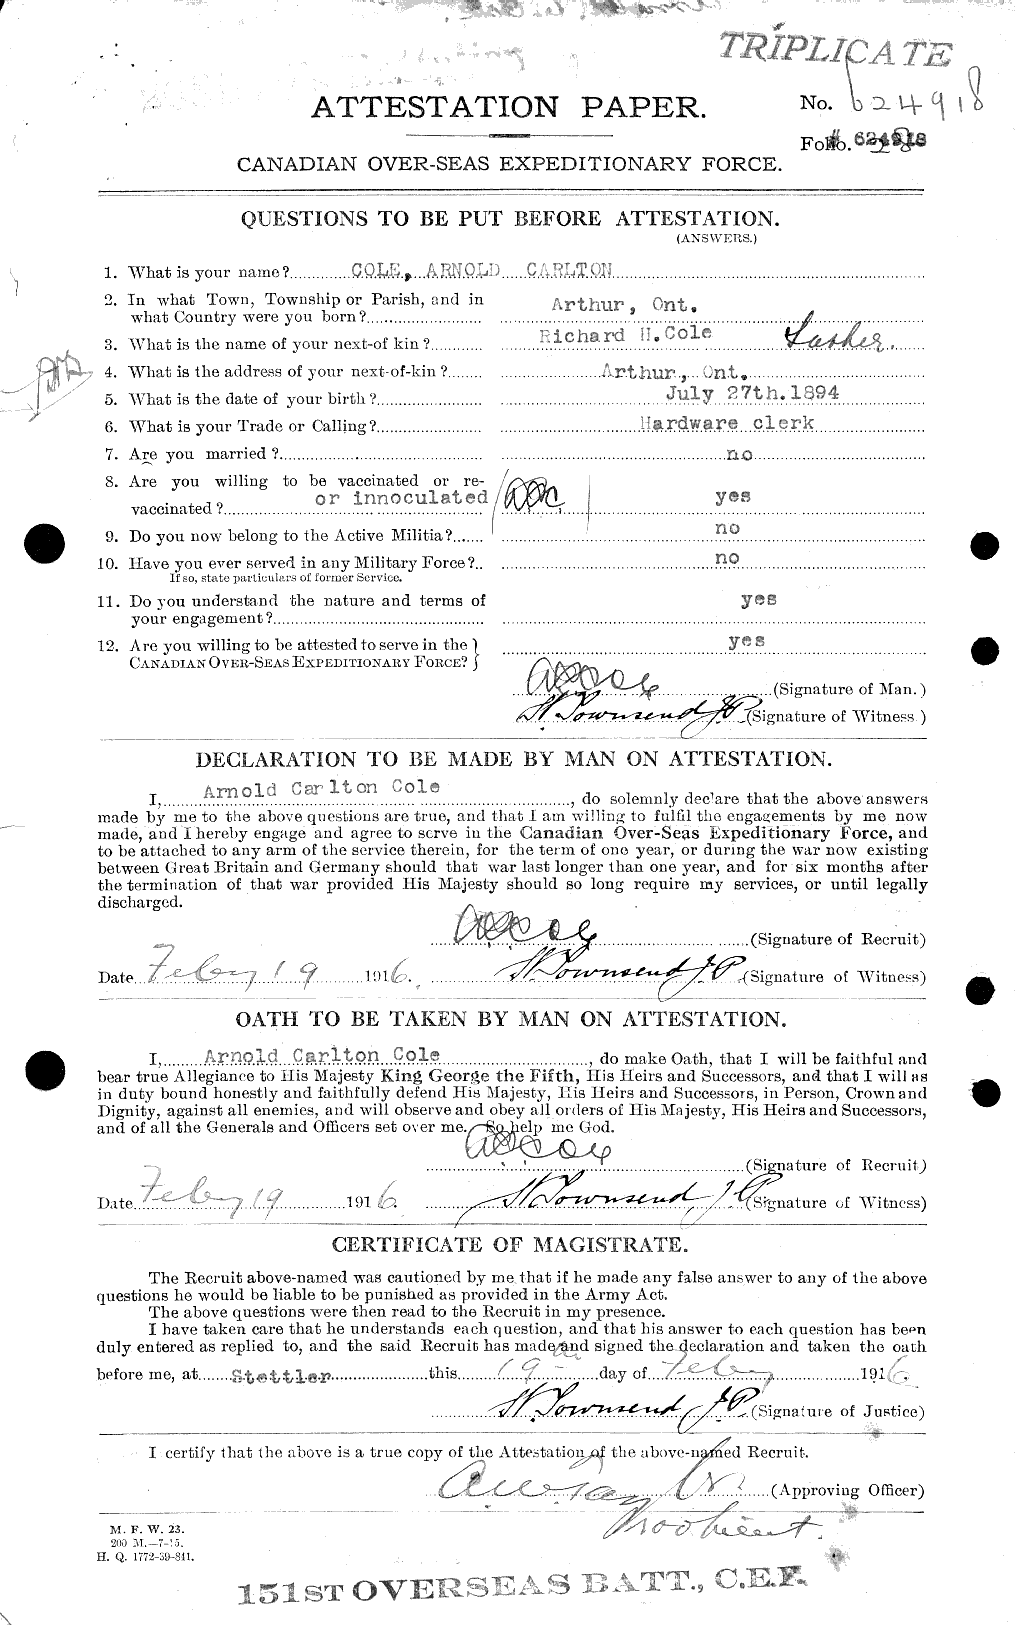 Personnel Records of the First World War - CEF 027594a